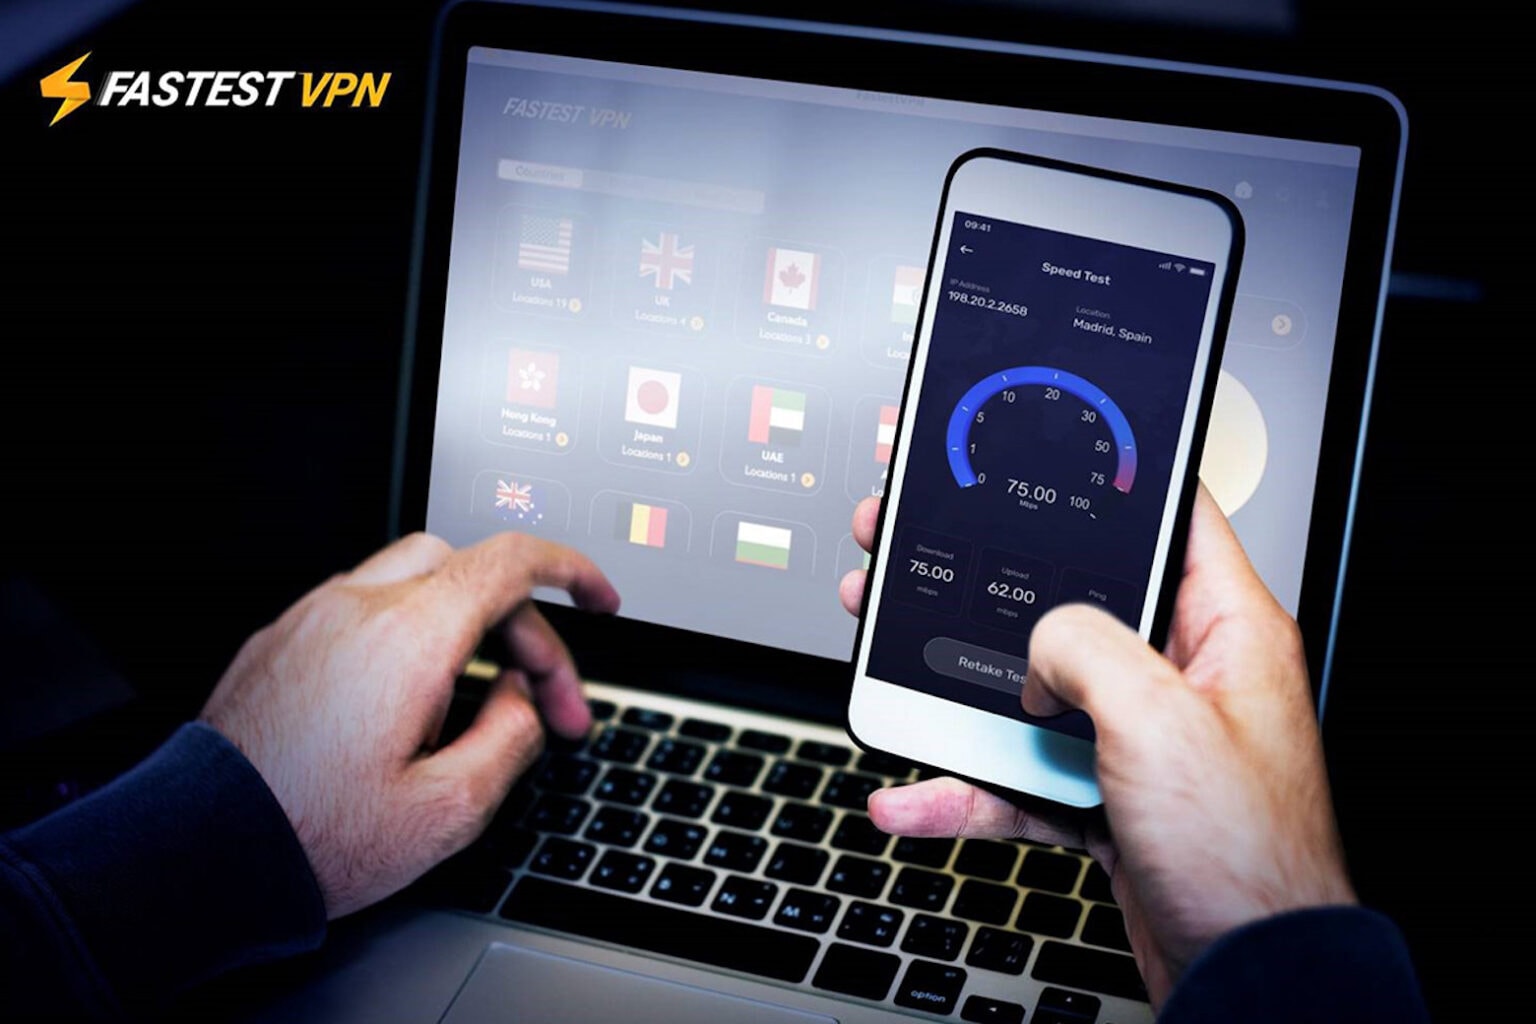 Save $320 on this 10-device Fastest VPN lifetime license.